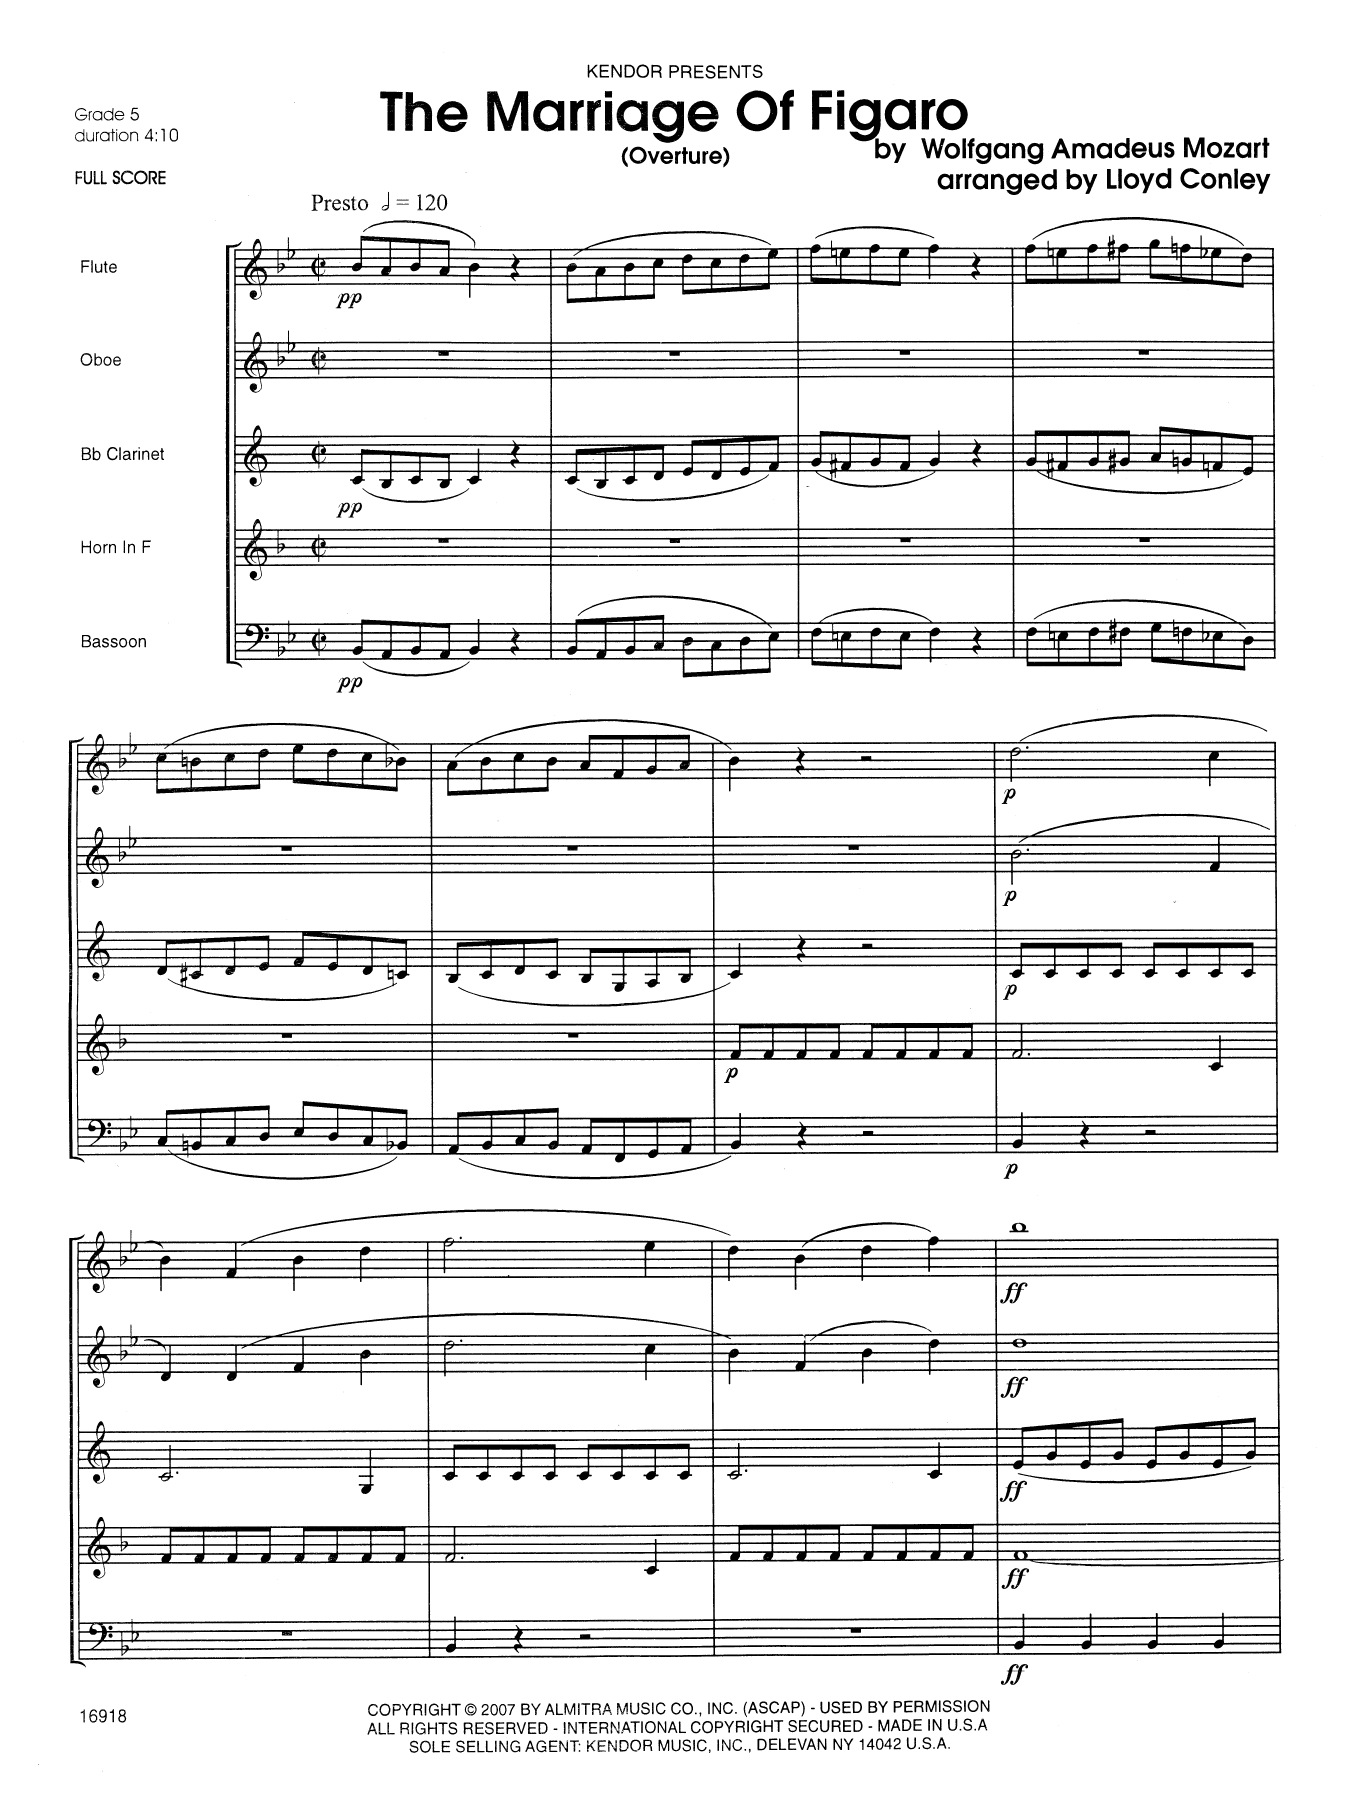 Download Lloyd Conley The Marriage Of Figaro (Overture) - Ful Sheet Music